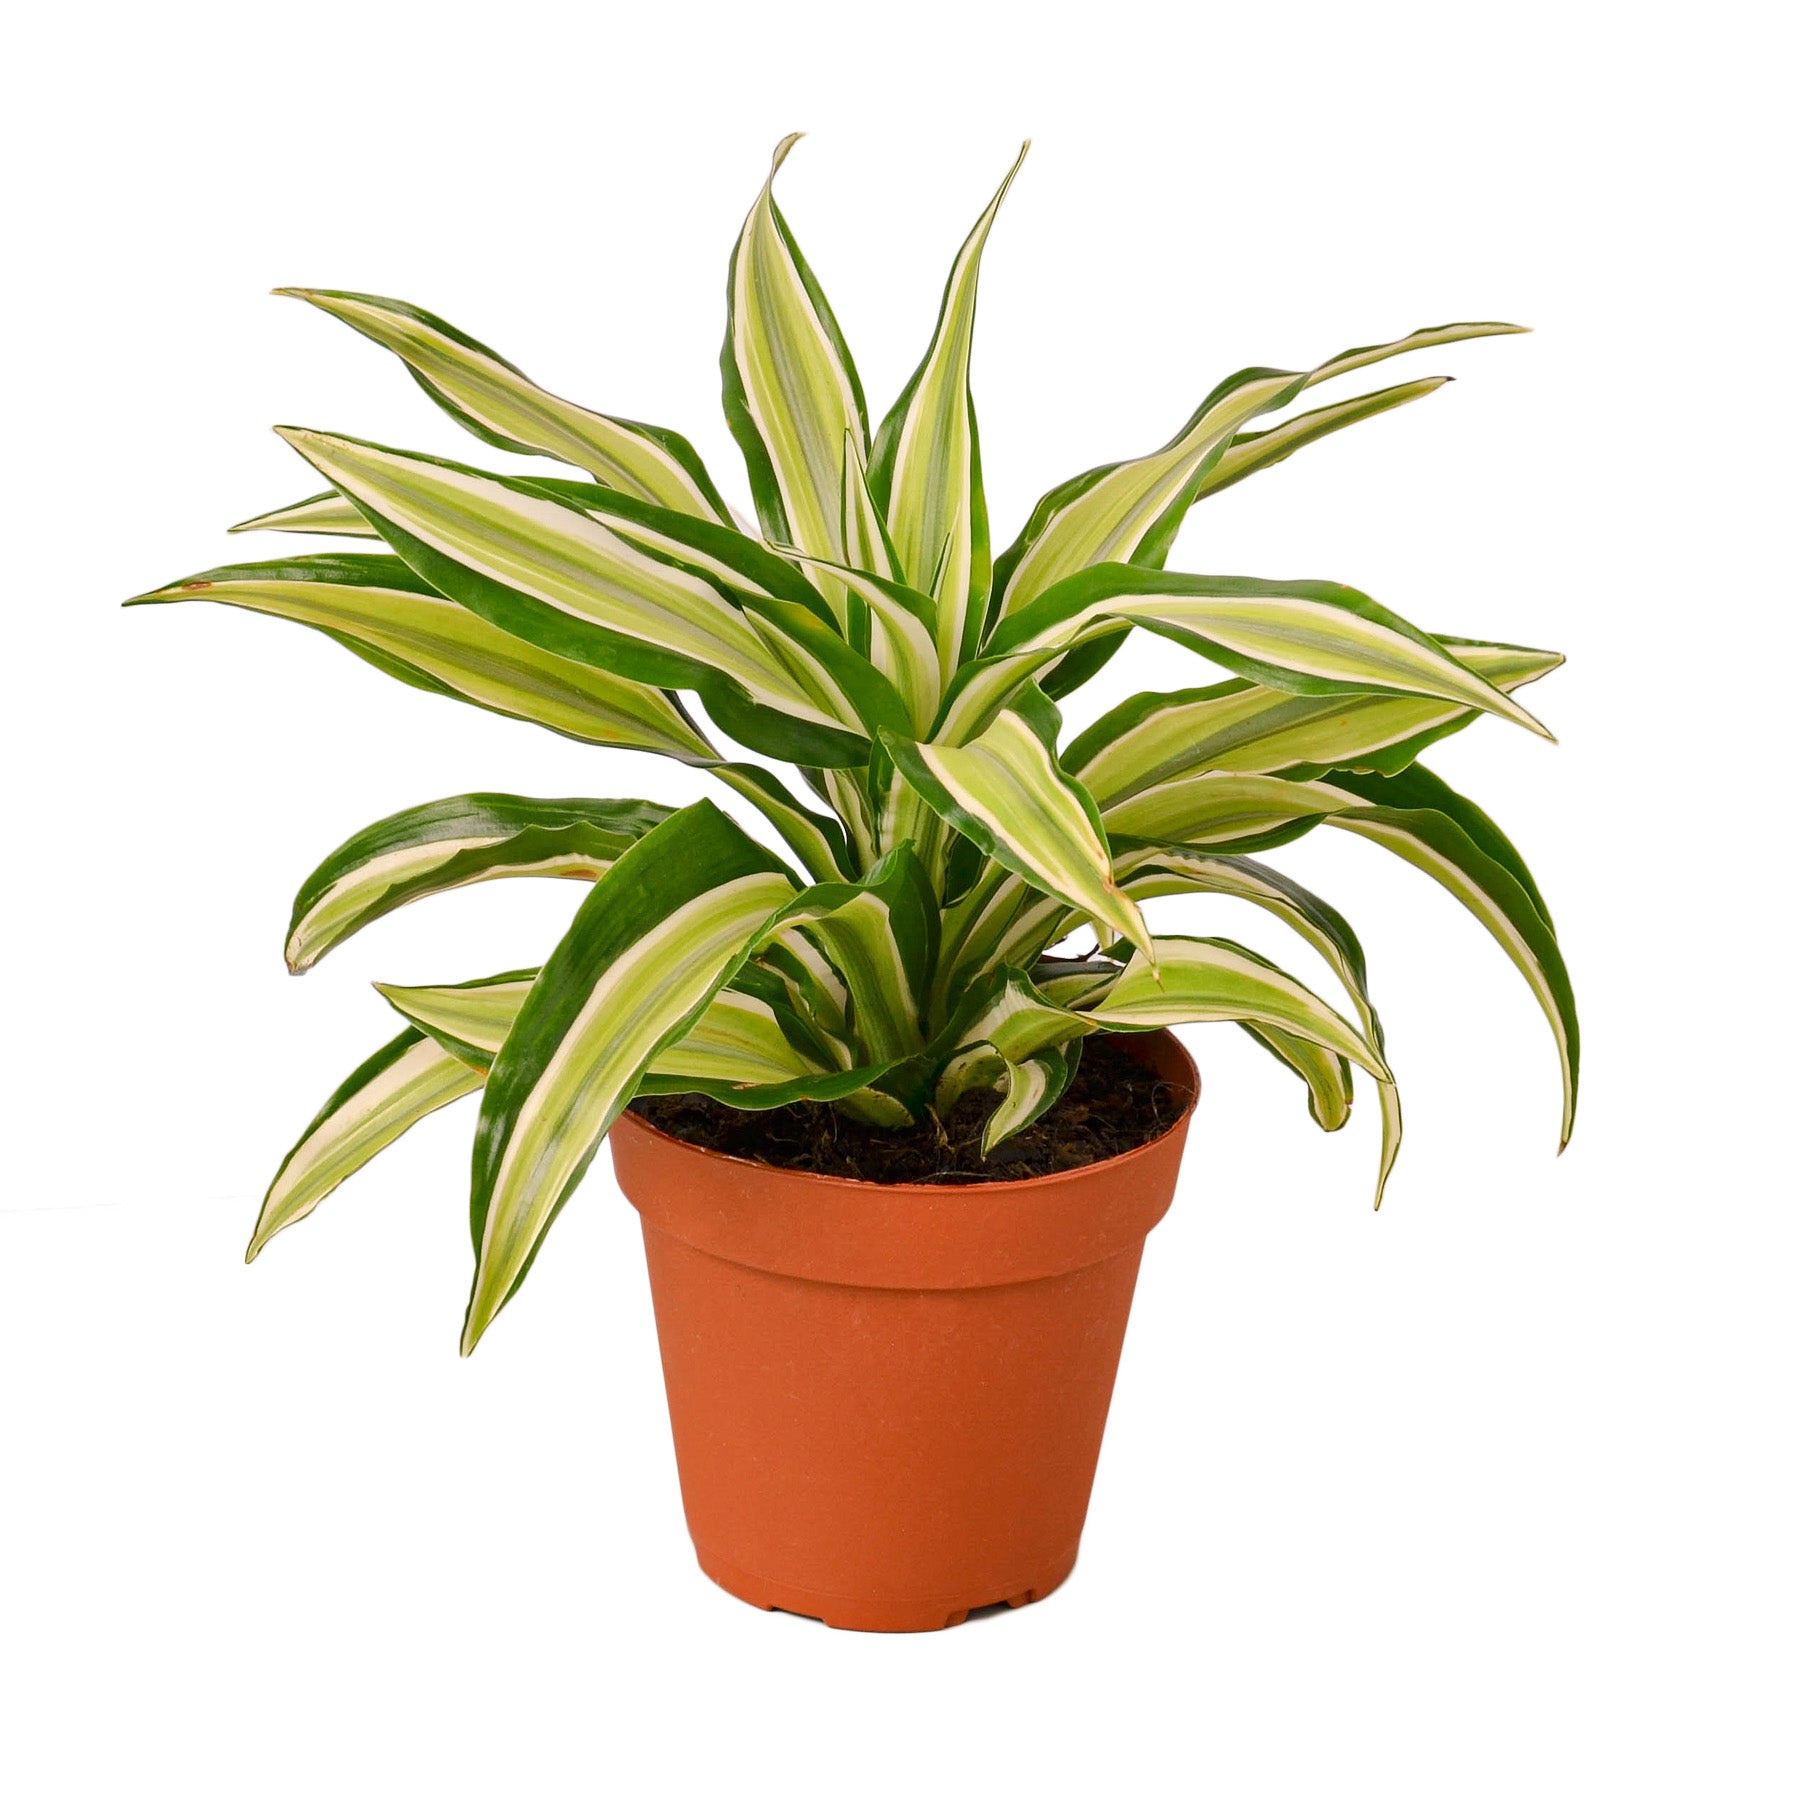 A plant in a pot on a white background, available at the best garden center near me.